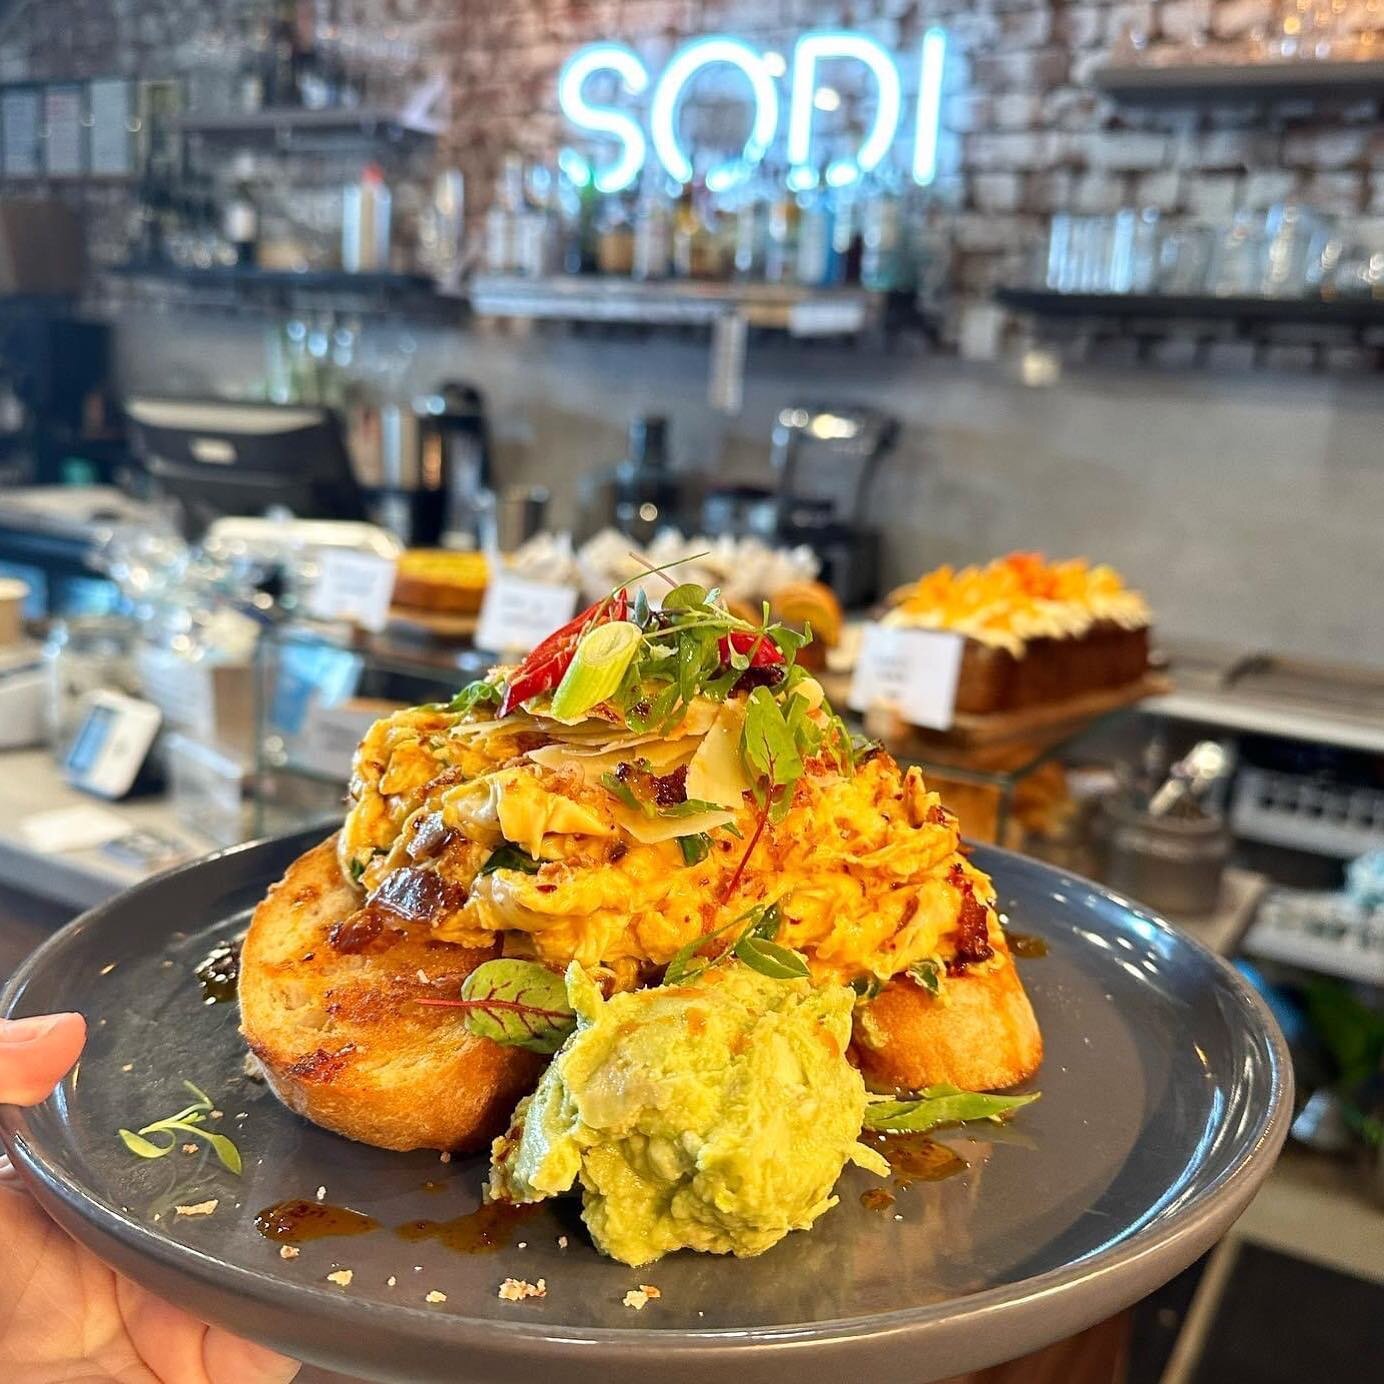 Our Spicy Scramble 🌶️ 
Perfect on these cold mornings!